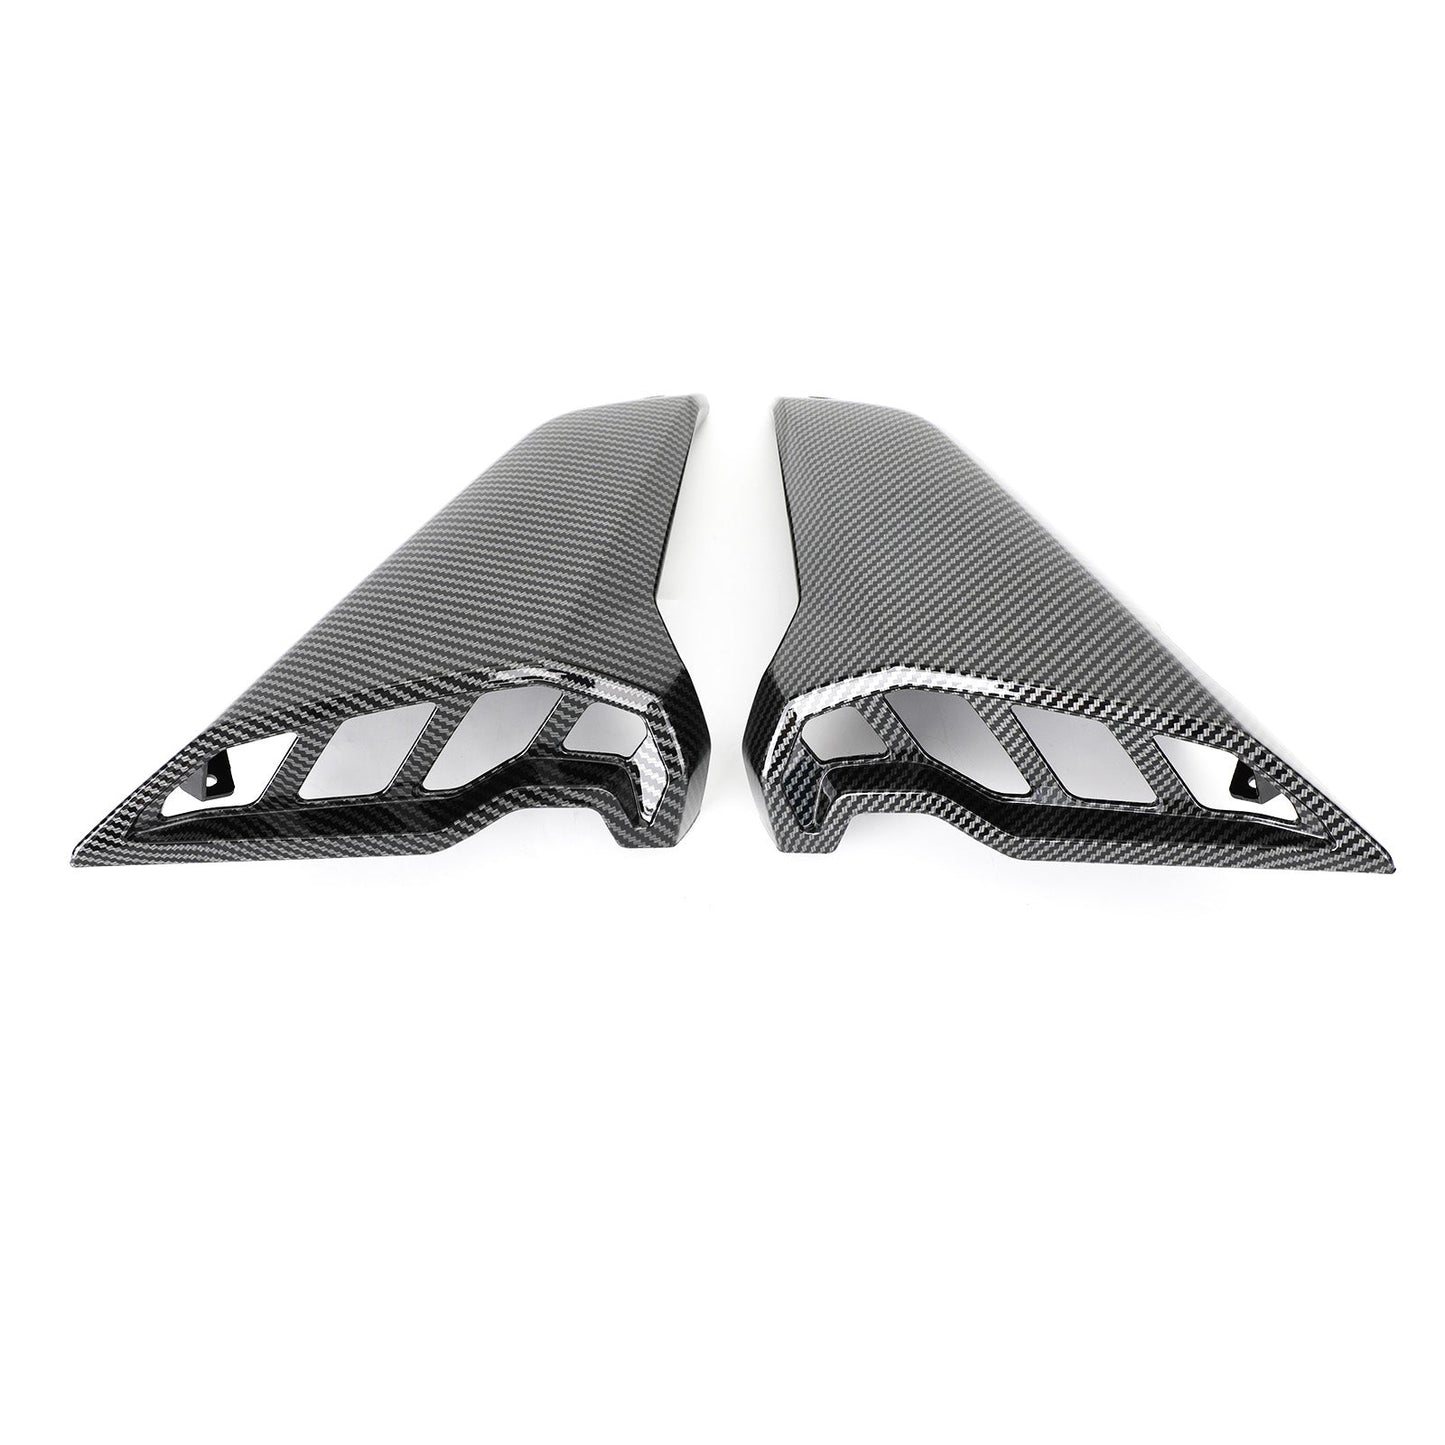 Black Air Intake Inlet Ram Tube Scoop Covers Fit for Yamaha FZ09 MT09 2017-2020